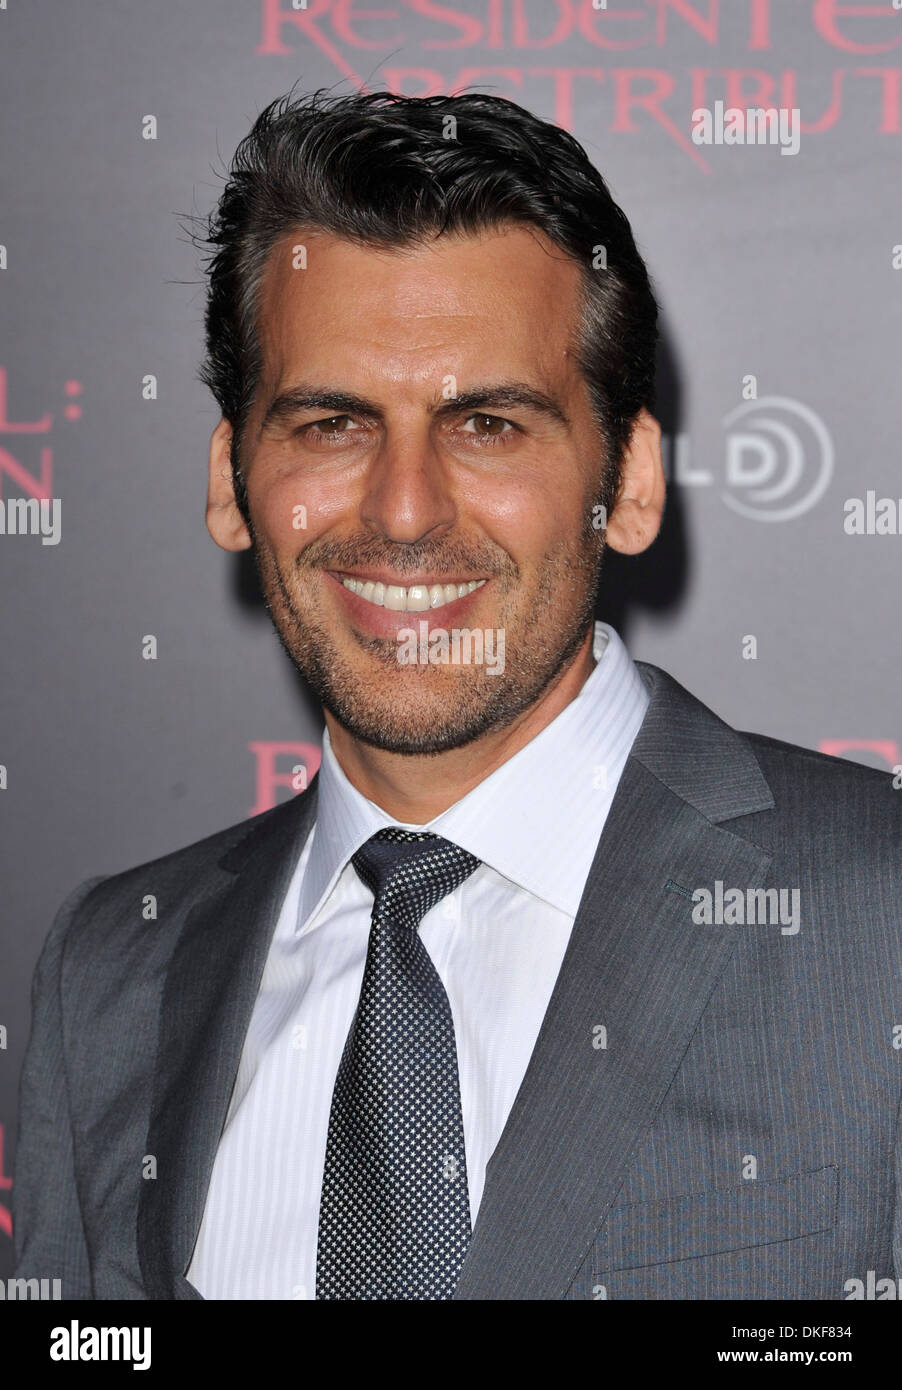 Oded Fehr "Resident Evil: Retribution" - Los Angeles Premiere - Arrivals Los Angeles California - 12.09.12 Stock Photo